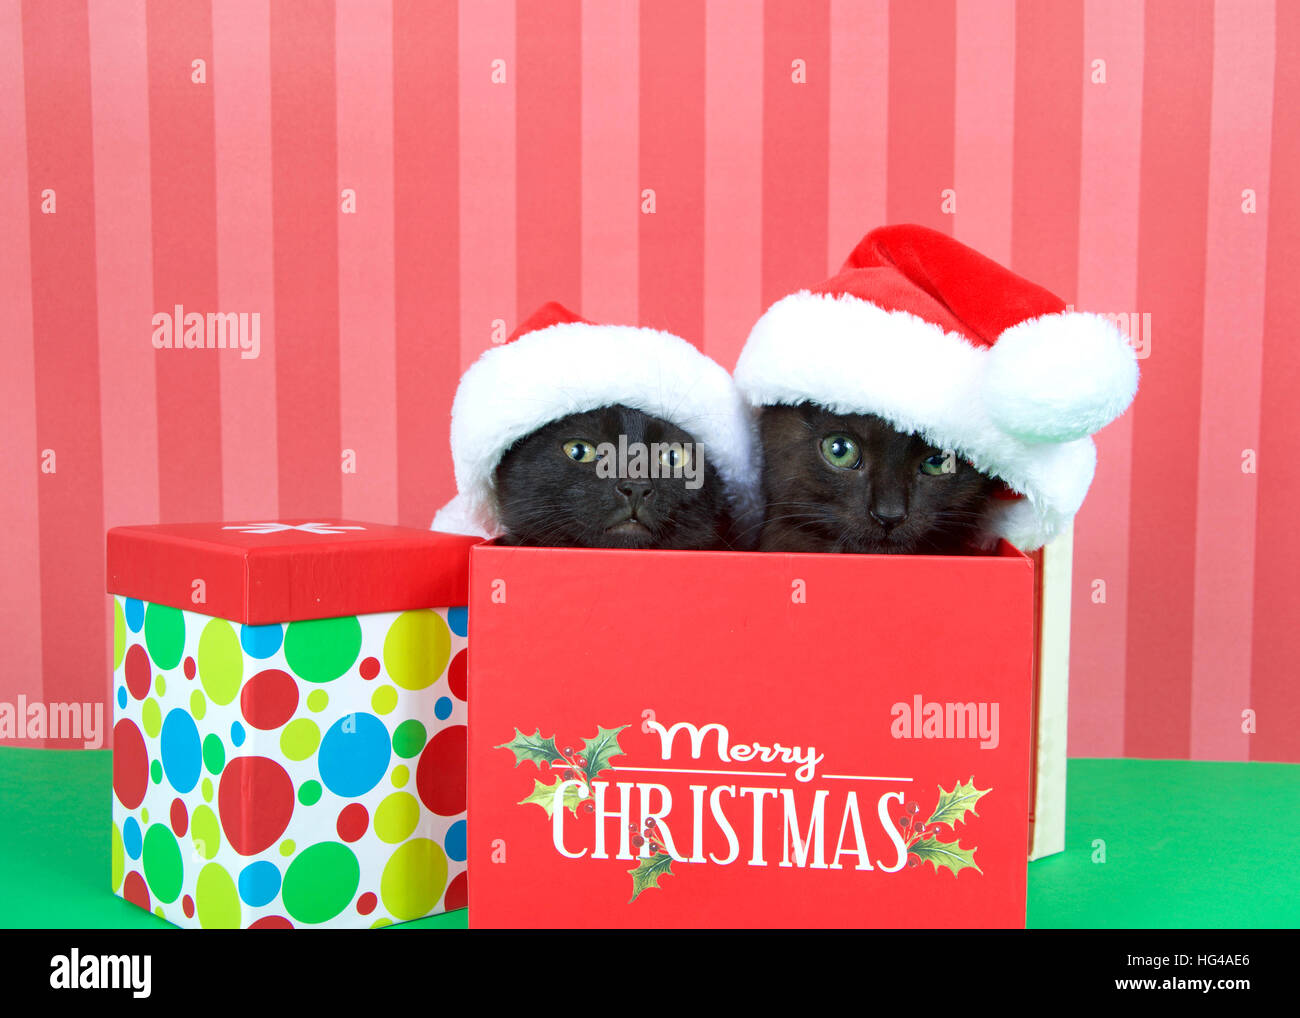 Two black kittens siblings brother sister popping out of a red holiday box wearing miniature santa hats, green table, red striped background.  Merry C Stock Photo